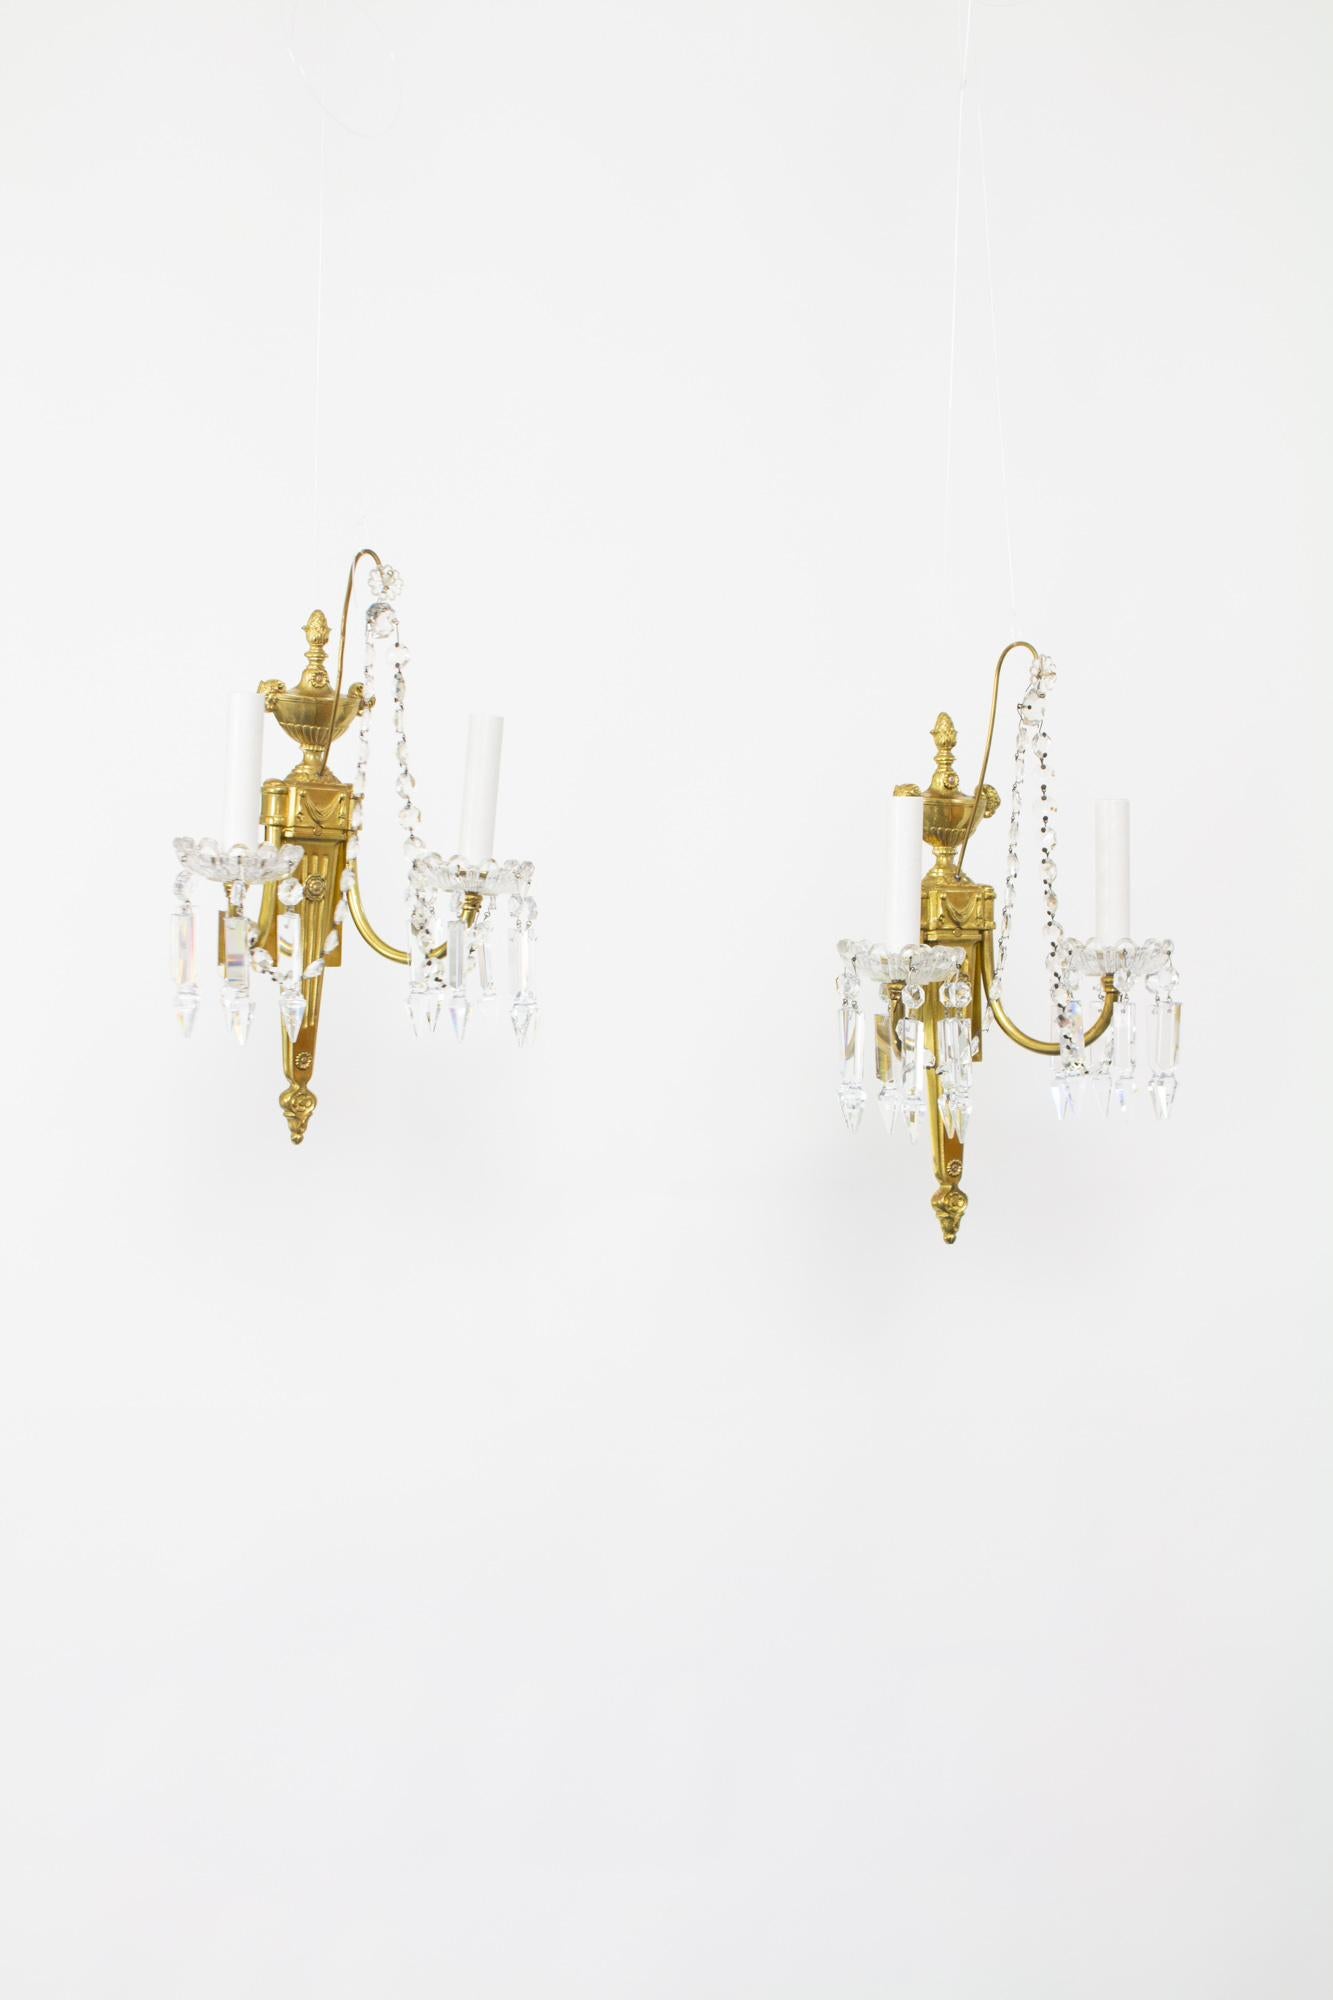 American S379 EF Caldwell Two Arm Neoclassical Sconces, a Pair